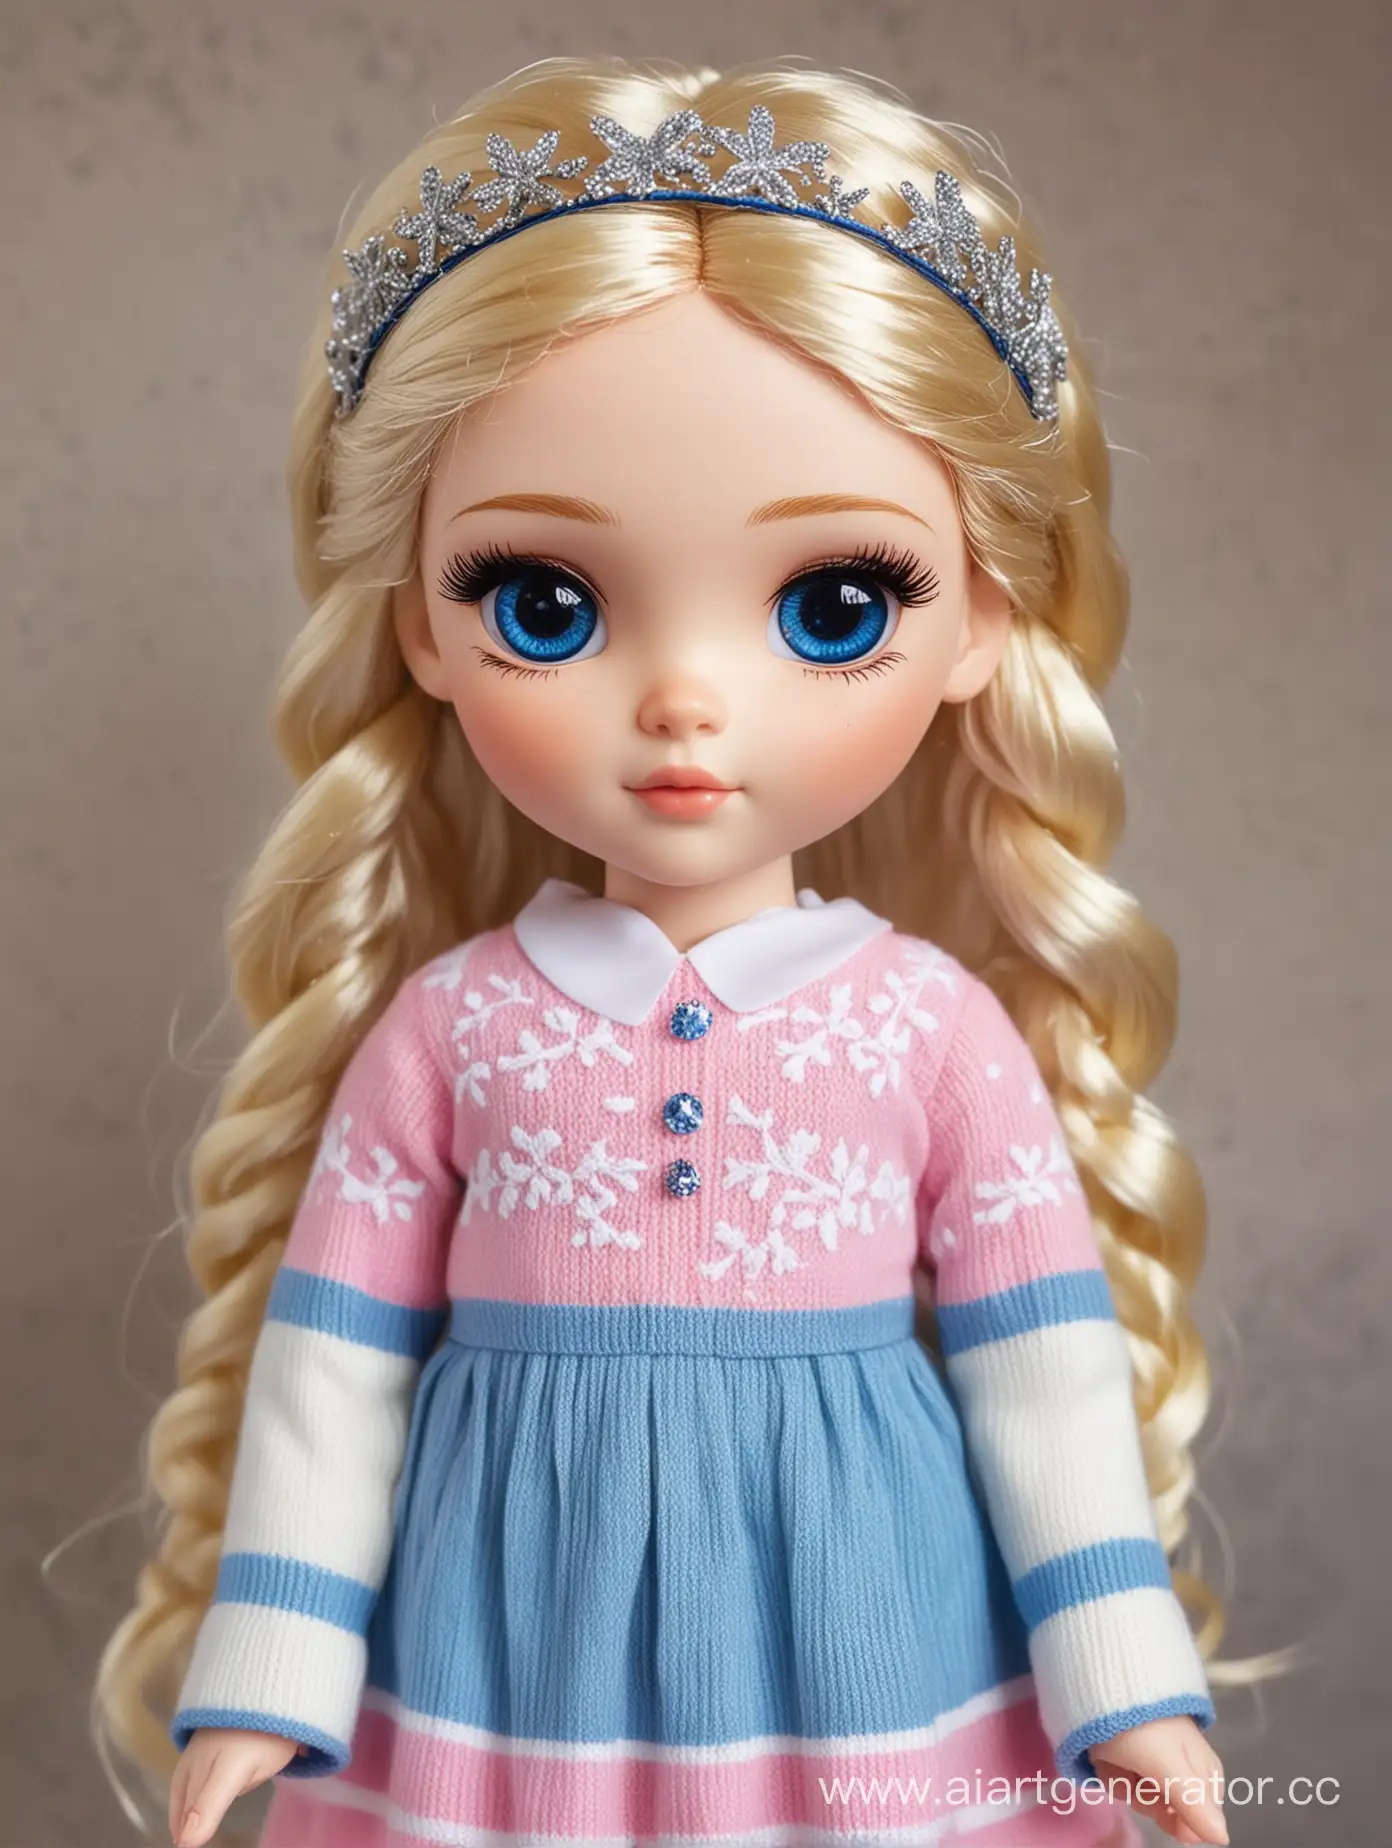 doll The princess has large blue eyes, long black eyelashes and black eyebrows, a slender and fragile physique, pale skin and white hair braided in two small braids, which are tied with blue elastic bands. On the princess's head is a blue diadem, decorated with a small sapphire. The princess wears a long pink and blue dress decorated with white snowflakes. On top of the dress is a white mini-sweater with pink patterns and a bright pink neckline. Alyonka wears white socks with blue stripes and pale pink sneakers with white soles. The princess appears to be 12-13 years old.